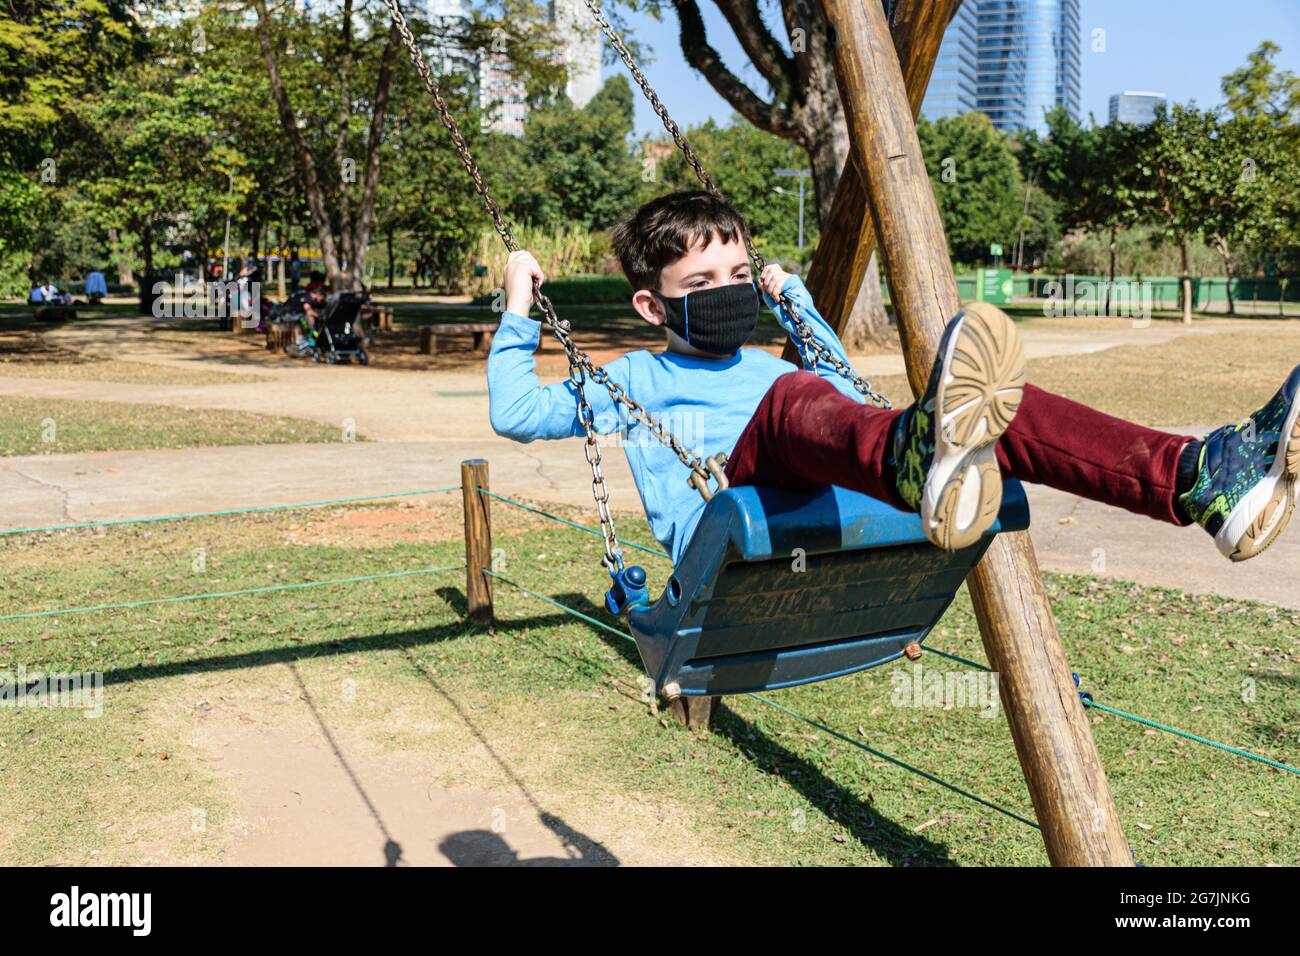 8 year old child swinging hard on a swing on a sunny day. Stock Photo